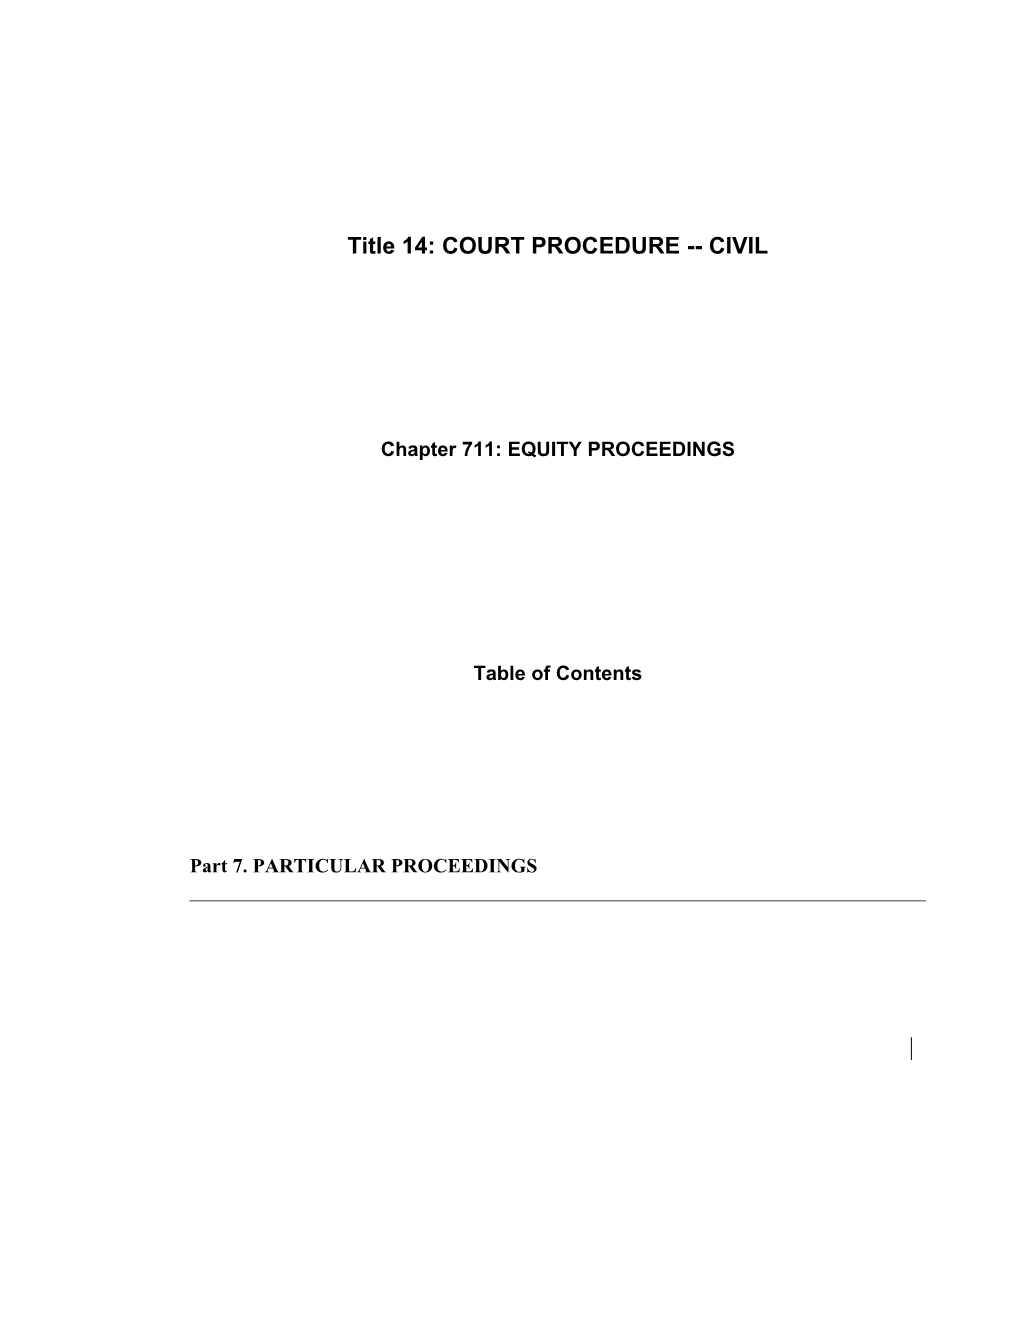 MRS Title 14, Chapter711: EQUITY PROCEEDINGS